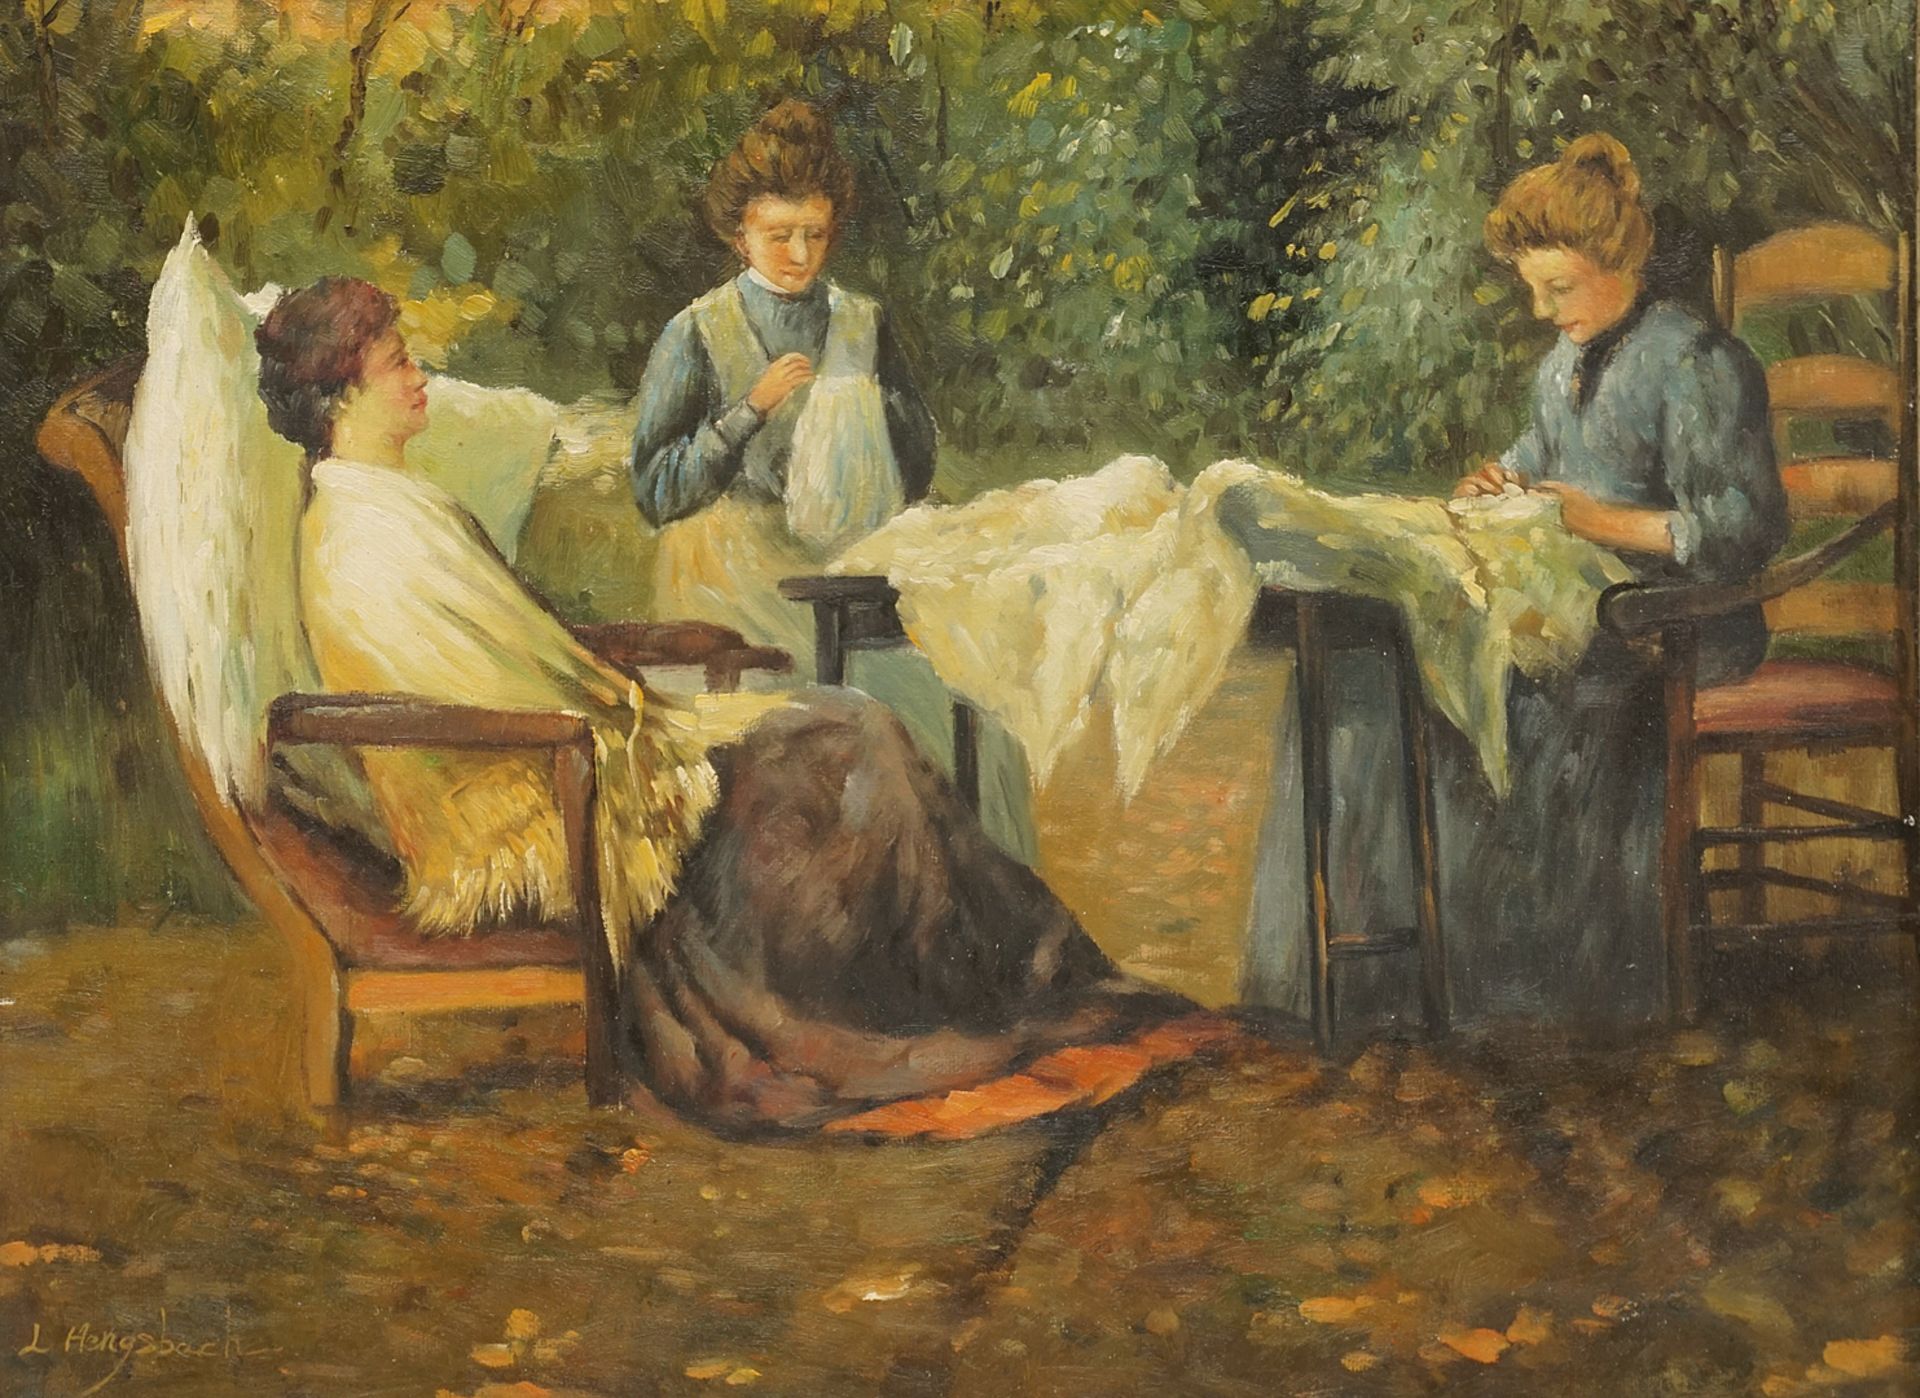 L. Hengsbach, "A quiet afternoon"